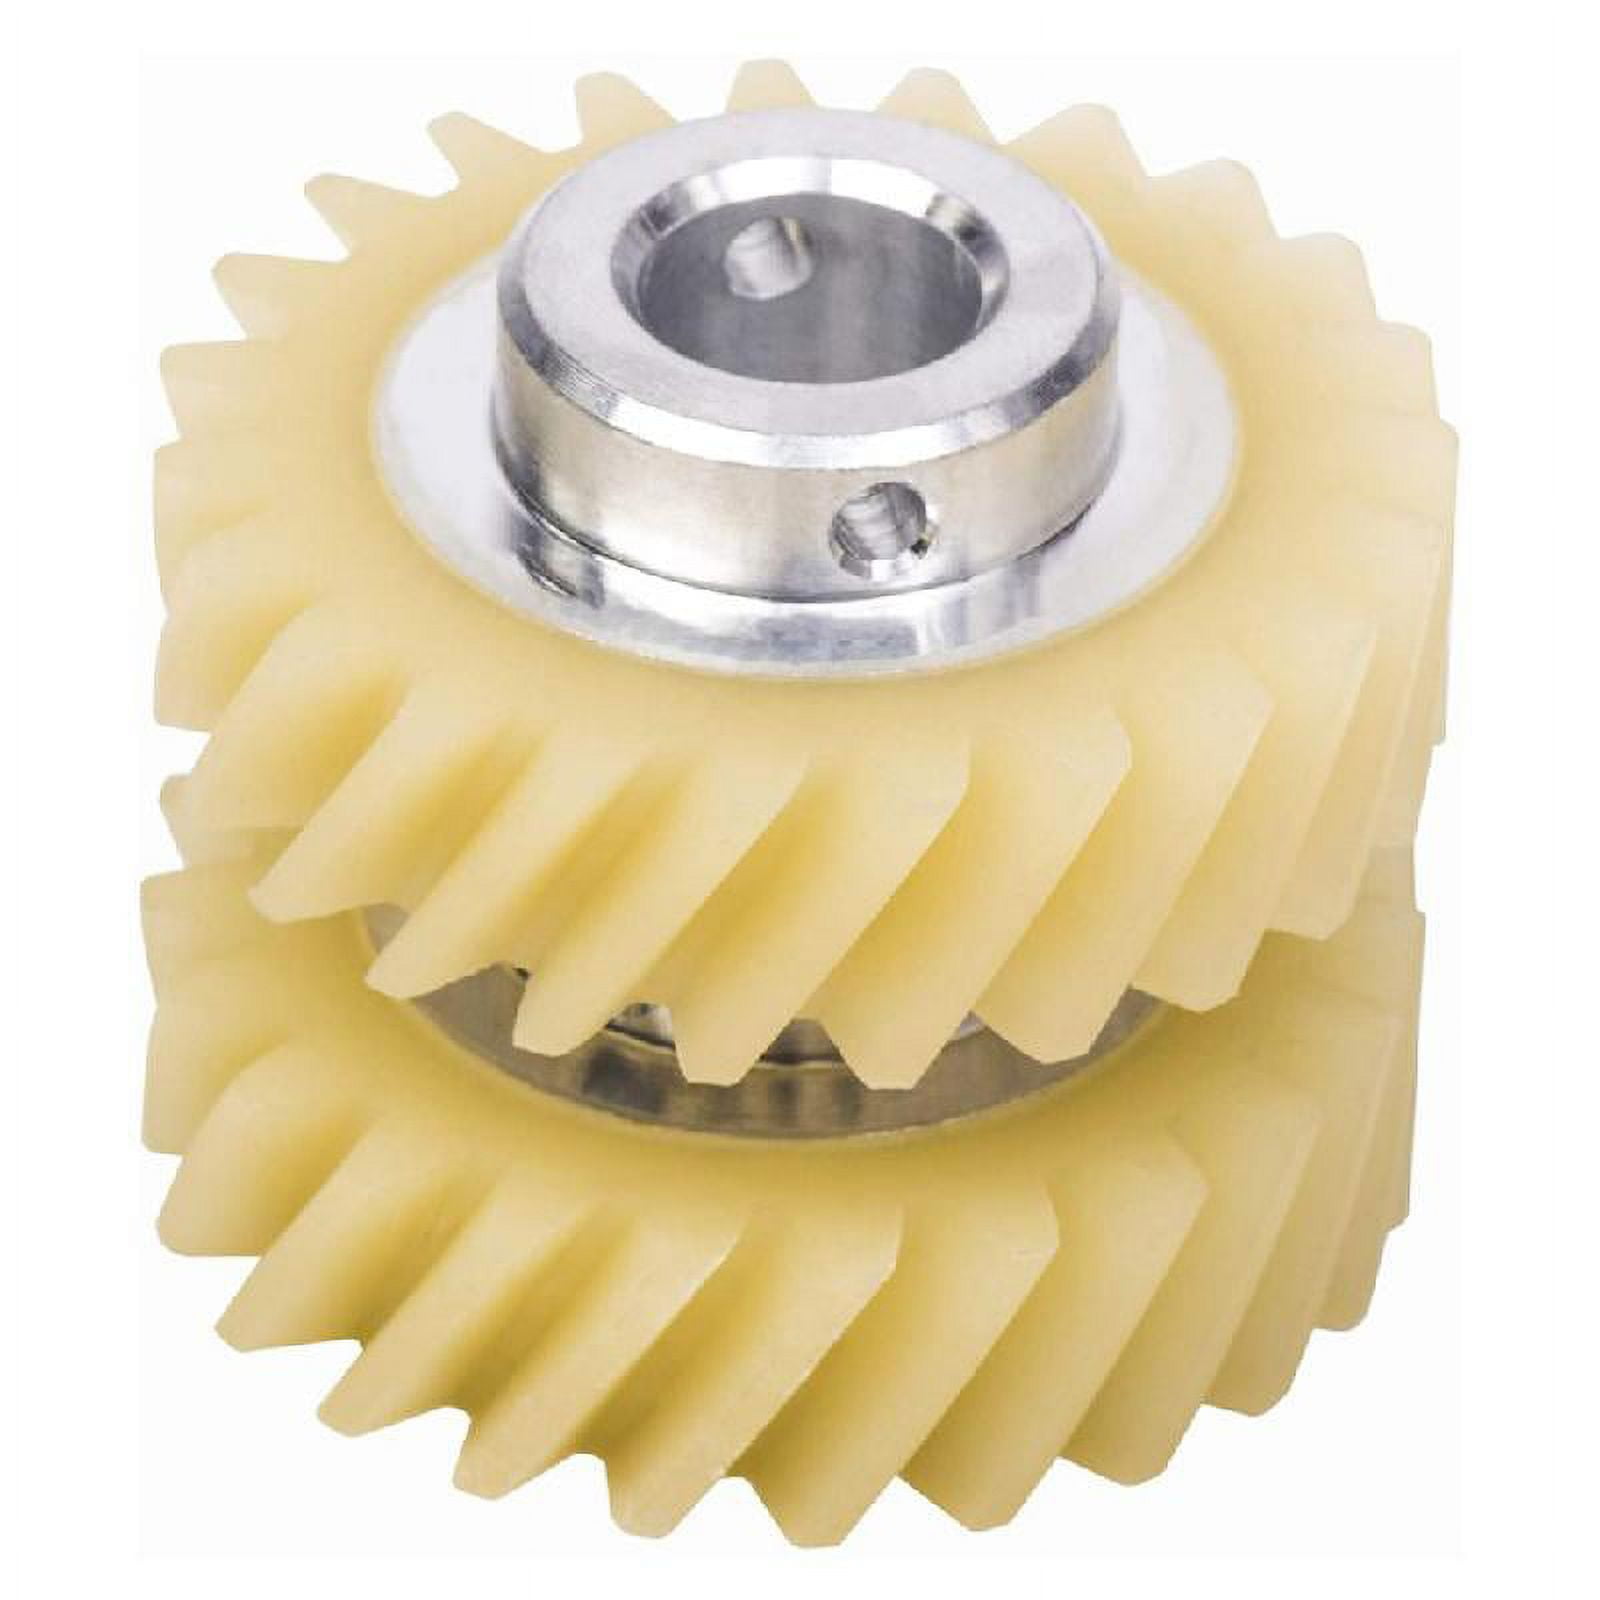 Upgraded W10112253 Mixer Worm Gear Replacement for Whirlpool